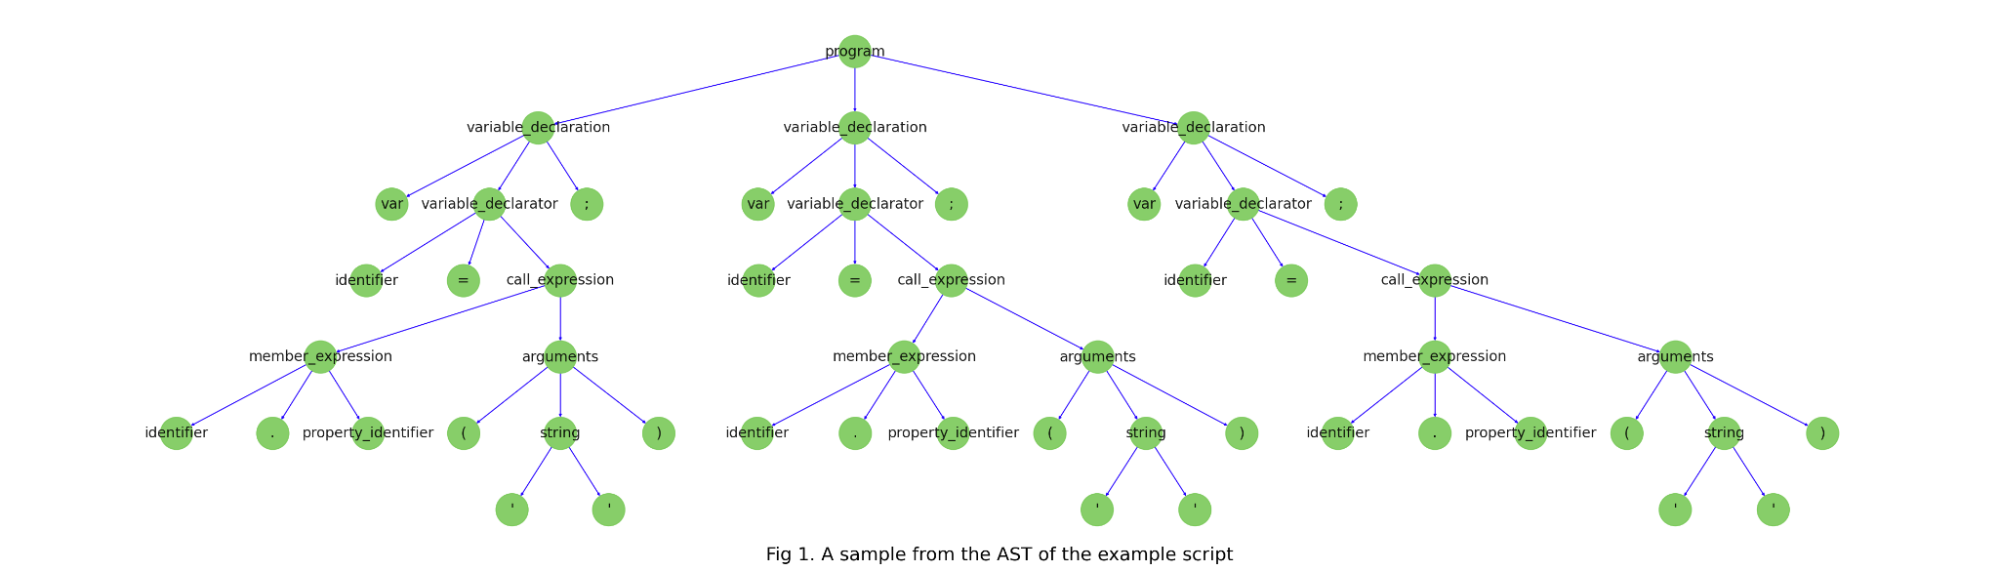 A diagram showing the abstract syntax tree for our simple example